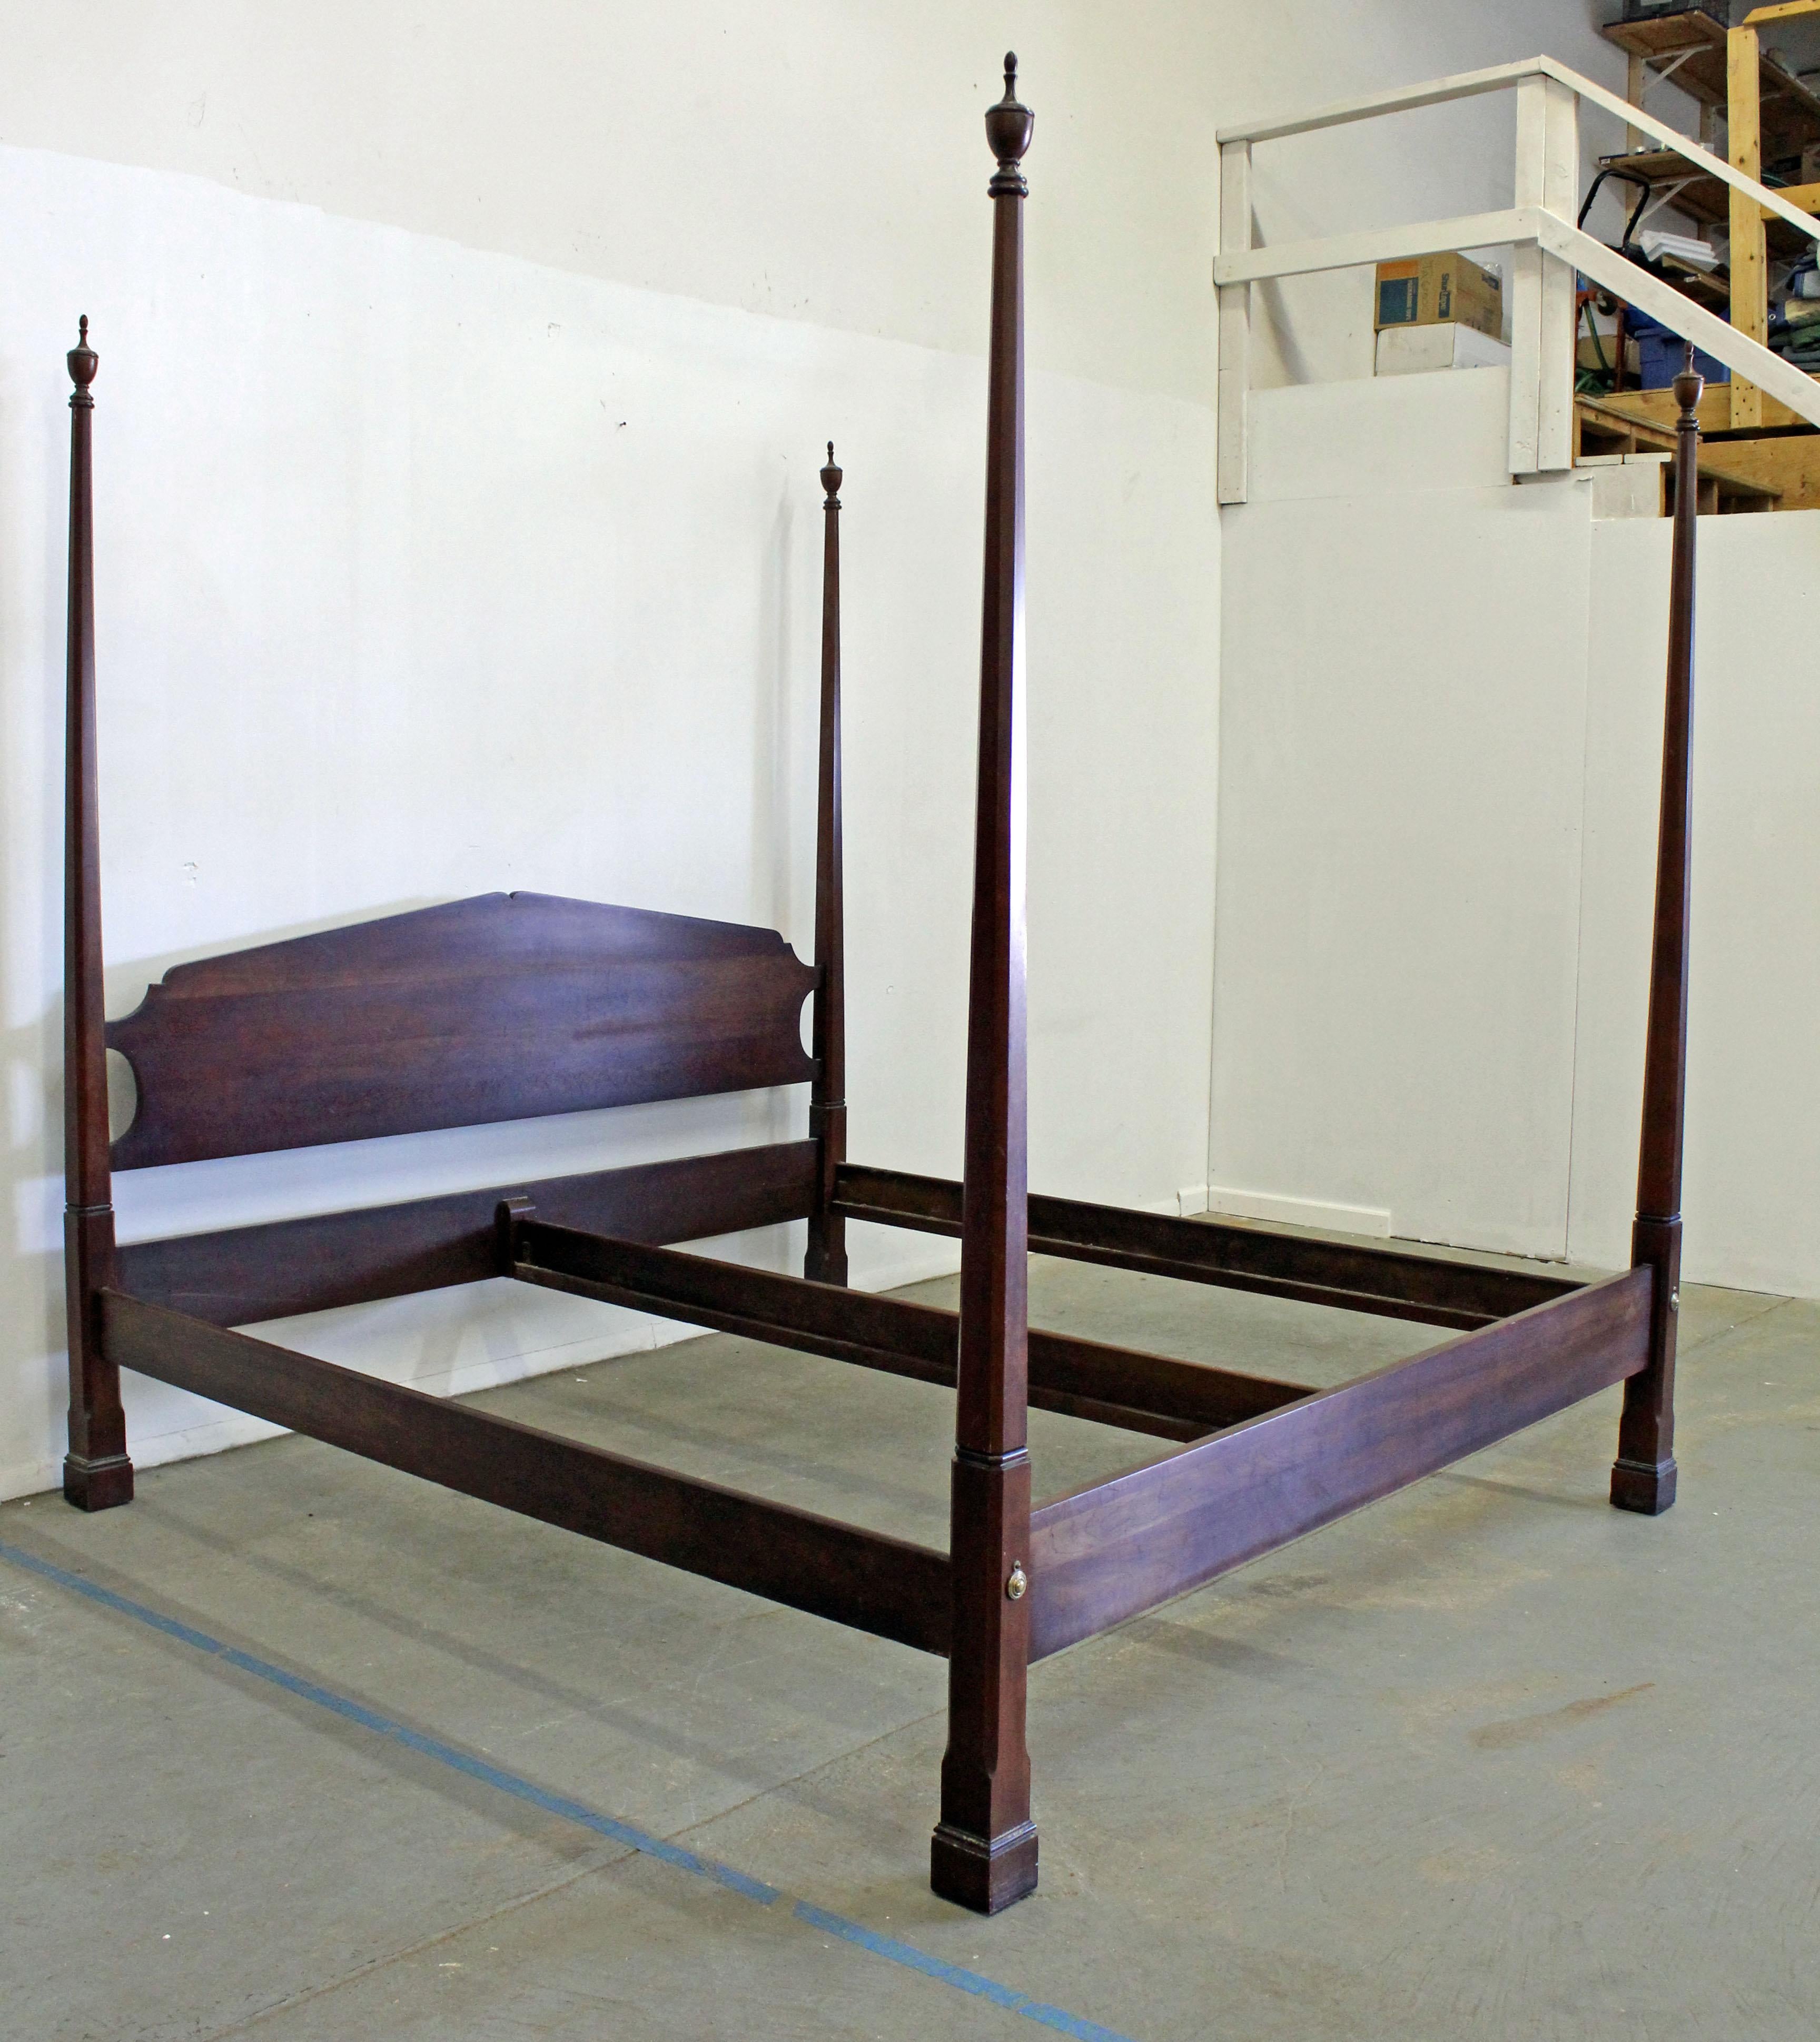 Offered is a vintage Chippendale king size bed frame made of cherry by Statton 'Old Towne'. Includes headboard, footboard, and slats. In good condition with some age wear (structurally sound, some surface scratches or wear, age wear). This piece